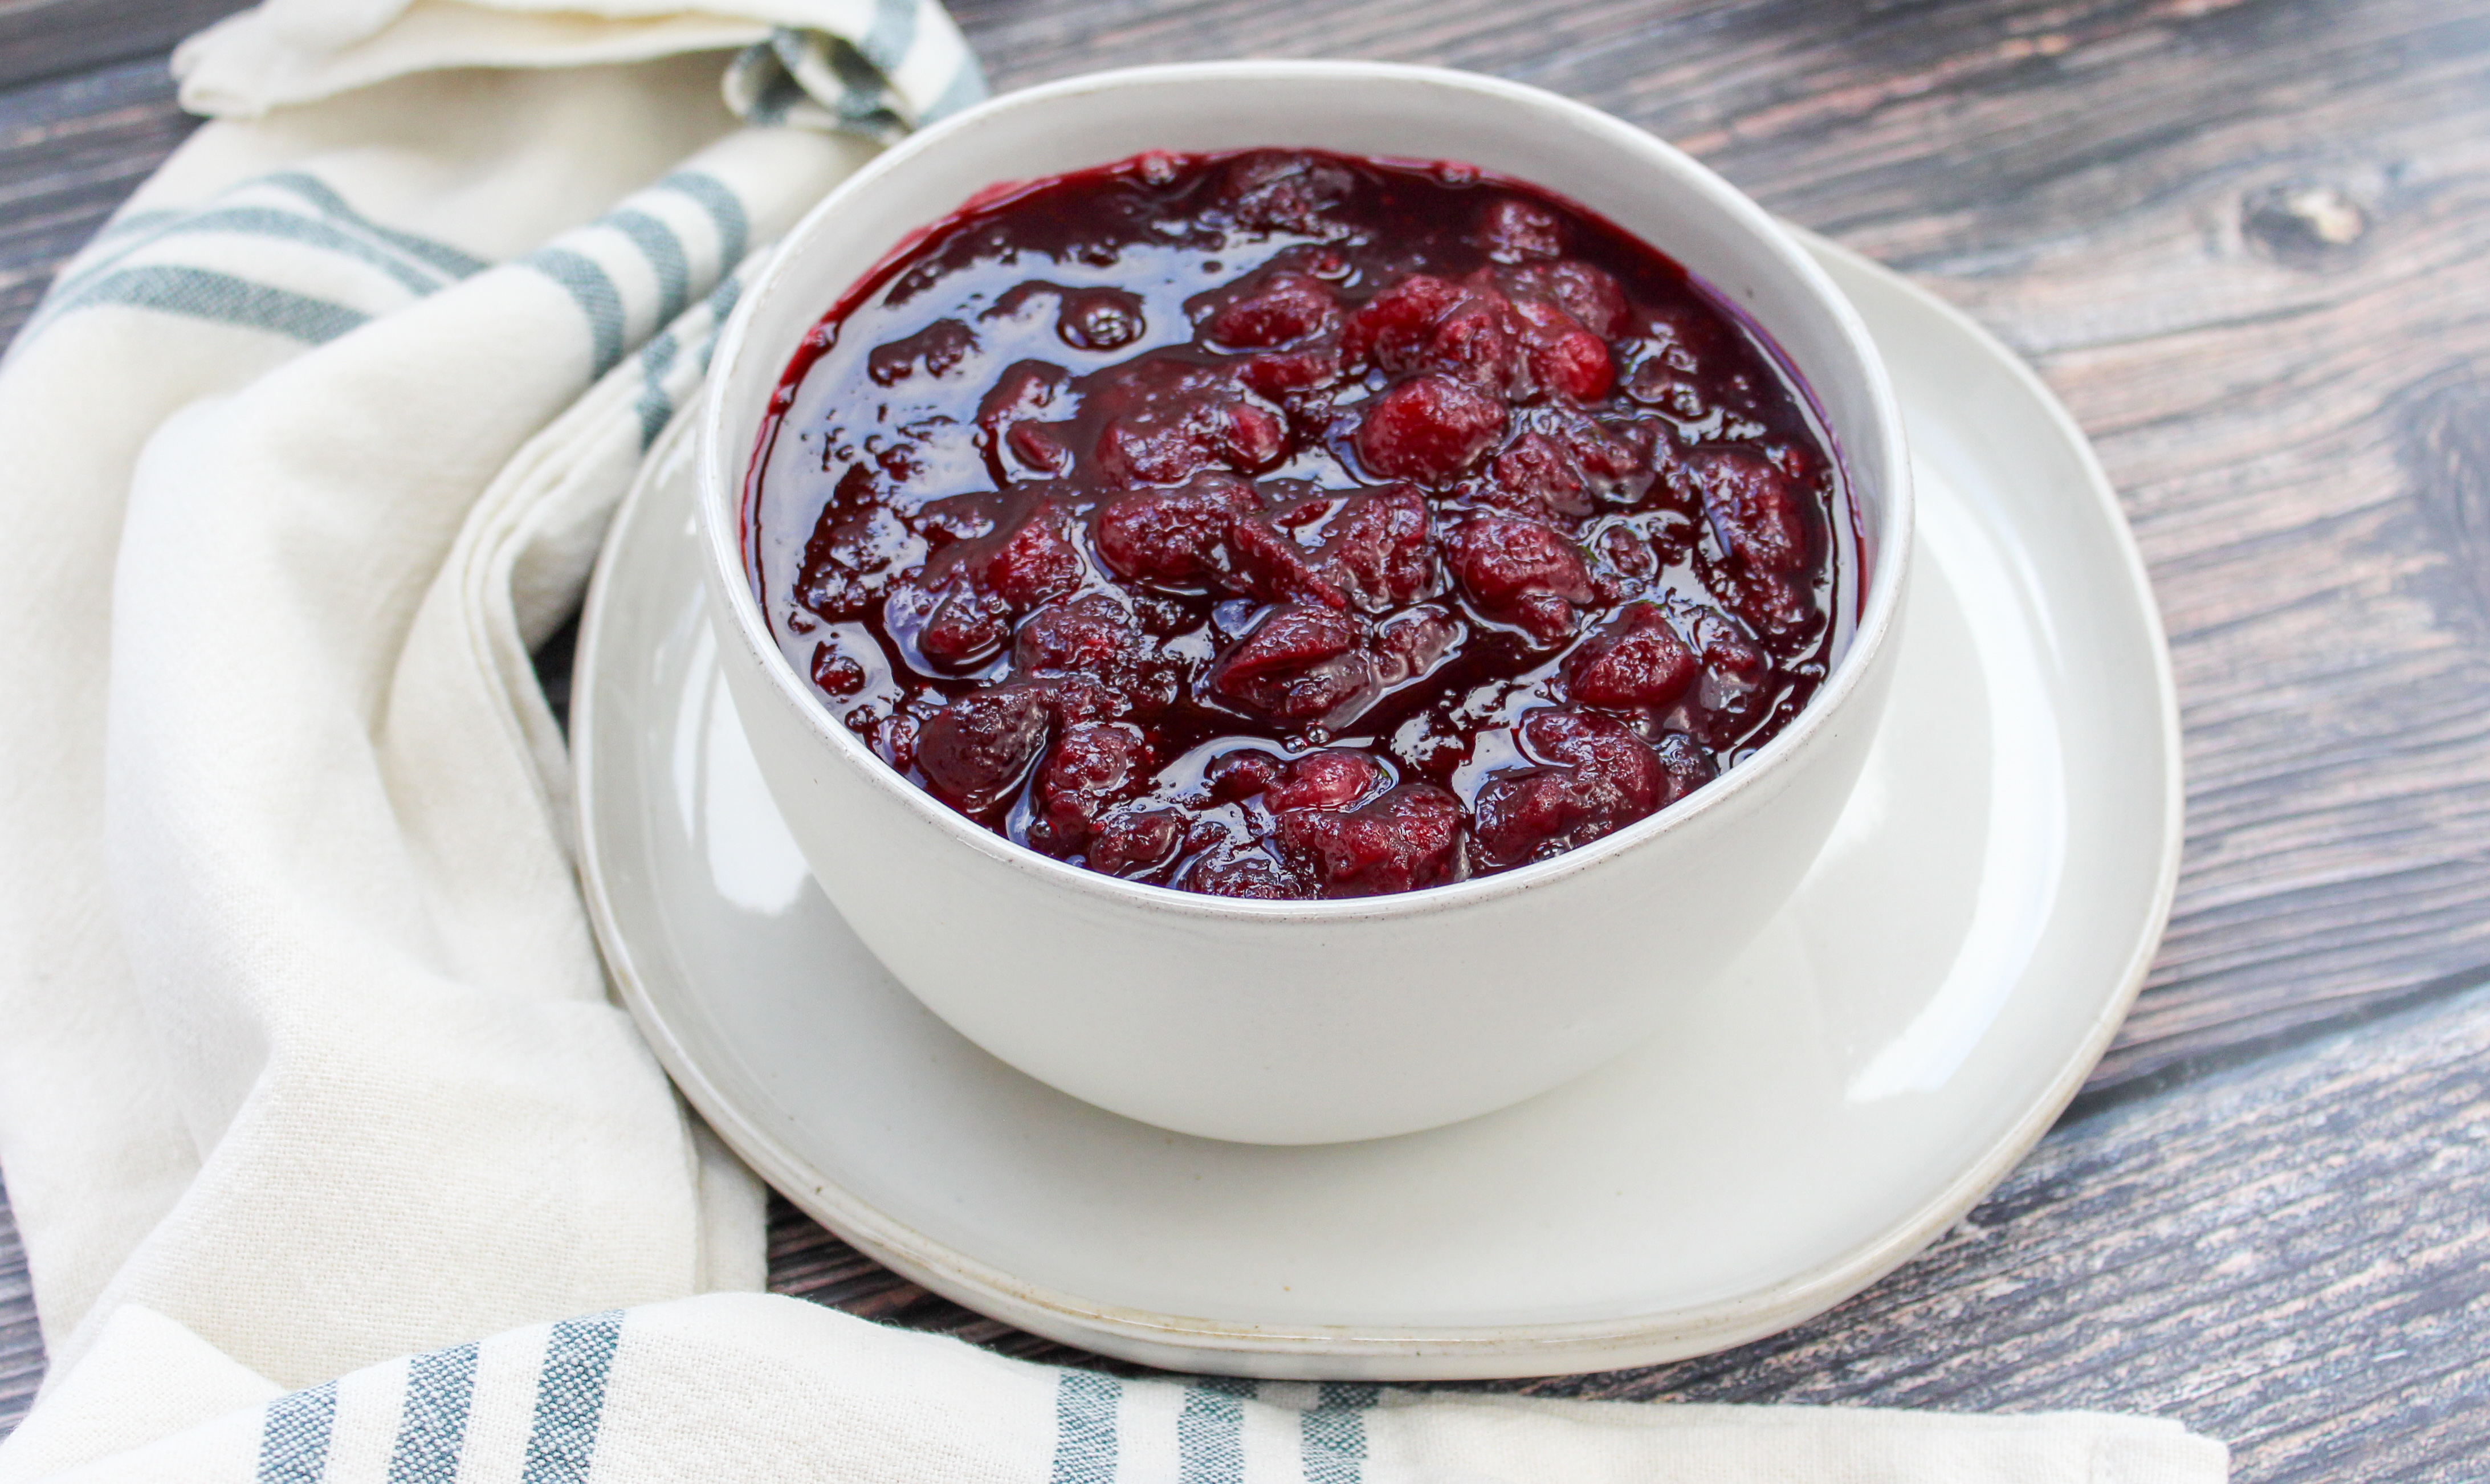 Cranberry sauce in a white bowl